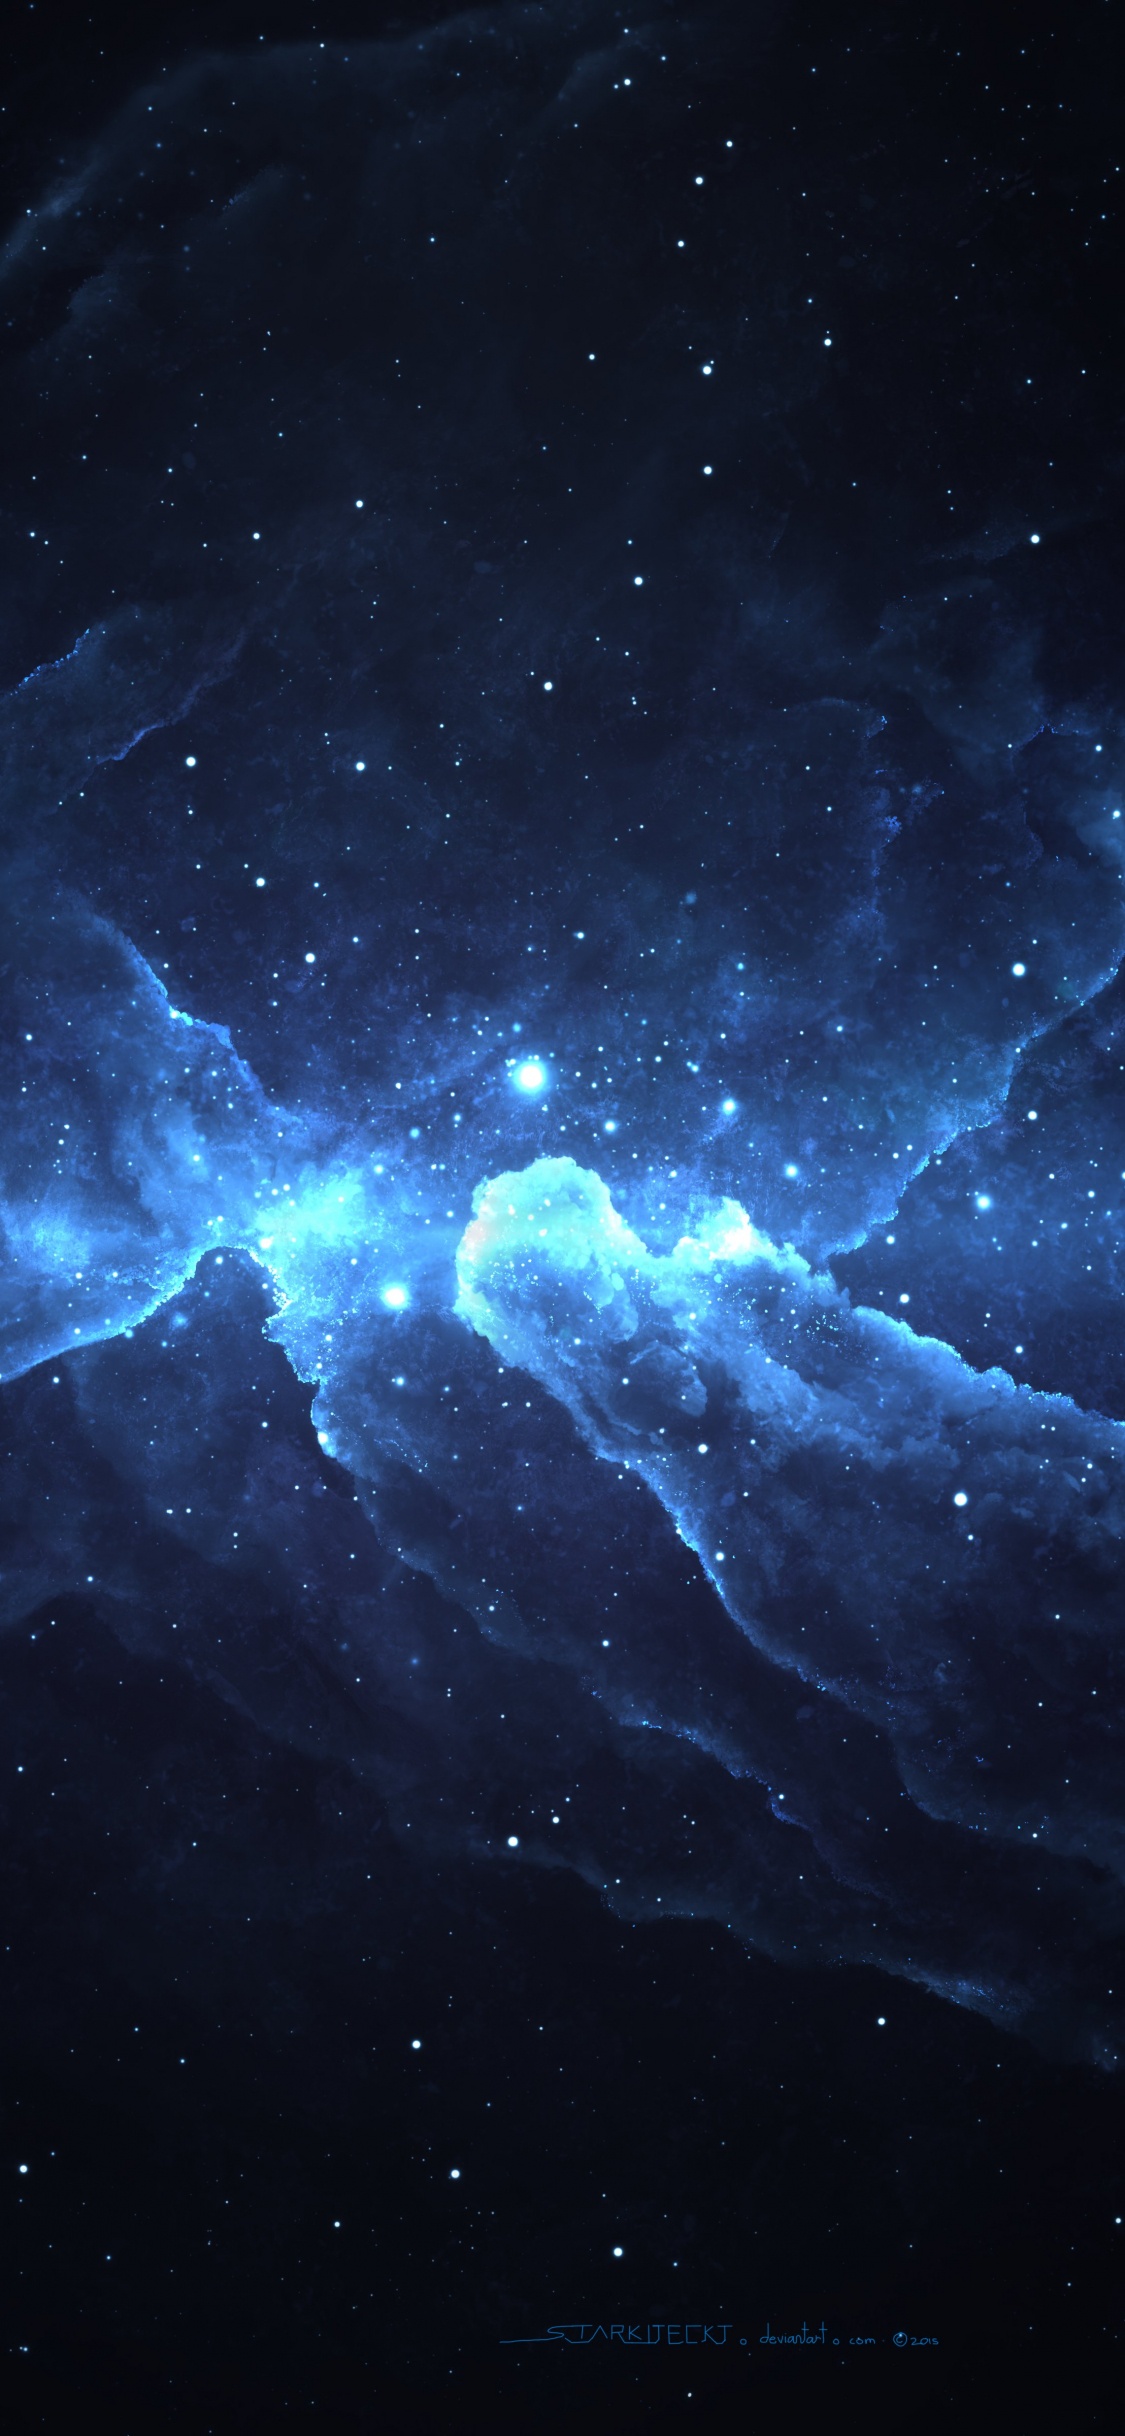 White and Blue Galaxy Illustration. Wallpaper in 1125x2436 Resolution